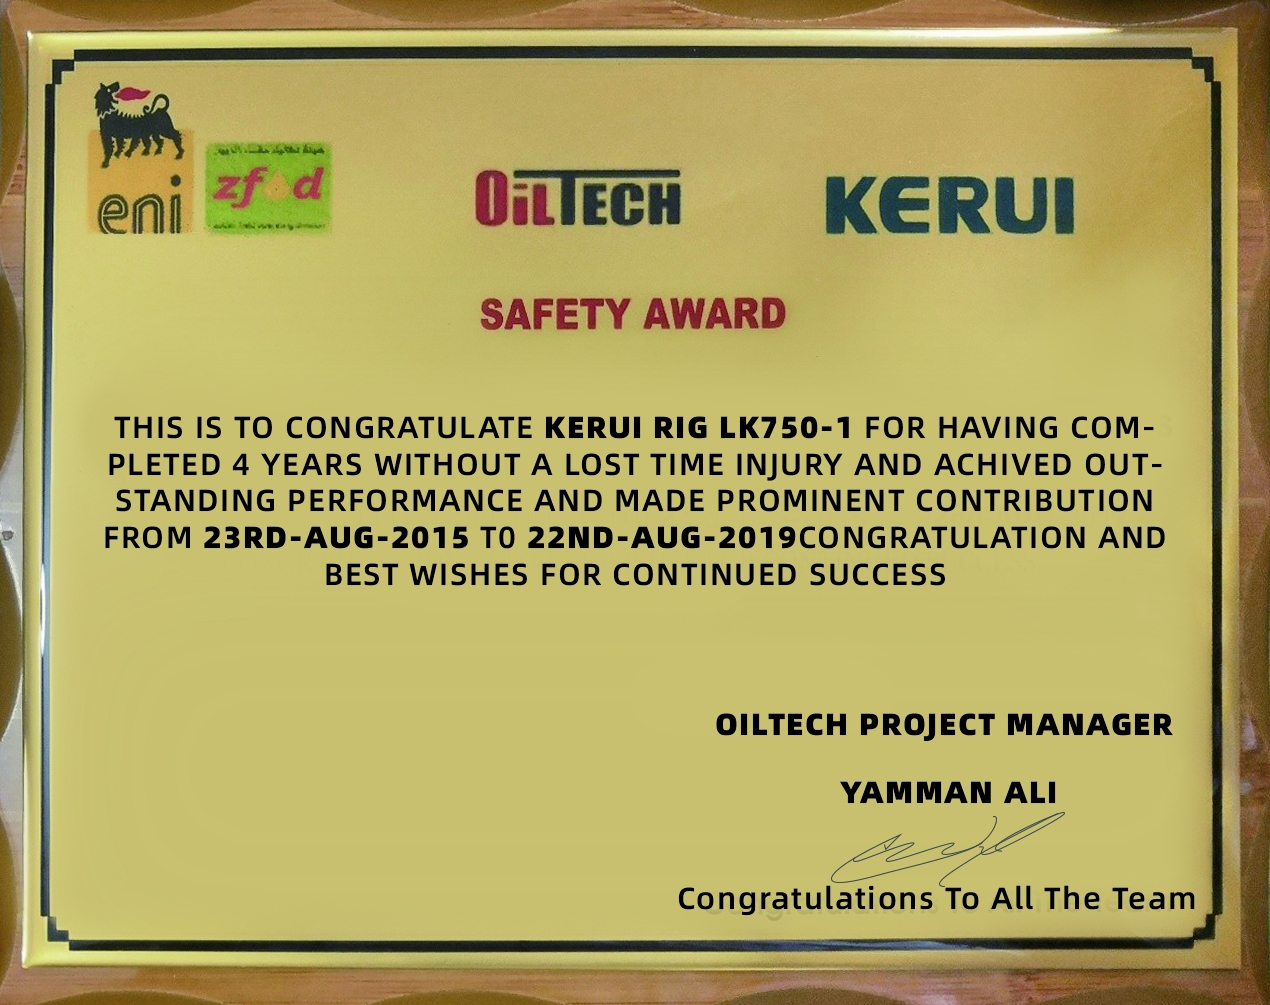 Shandong kerui petroleum technology co.,ltd. Iraq workover project won the 3th anniversary of continuous operation safety award